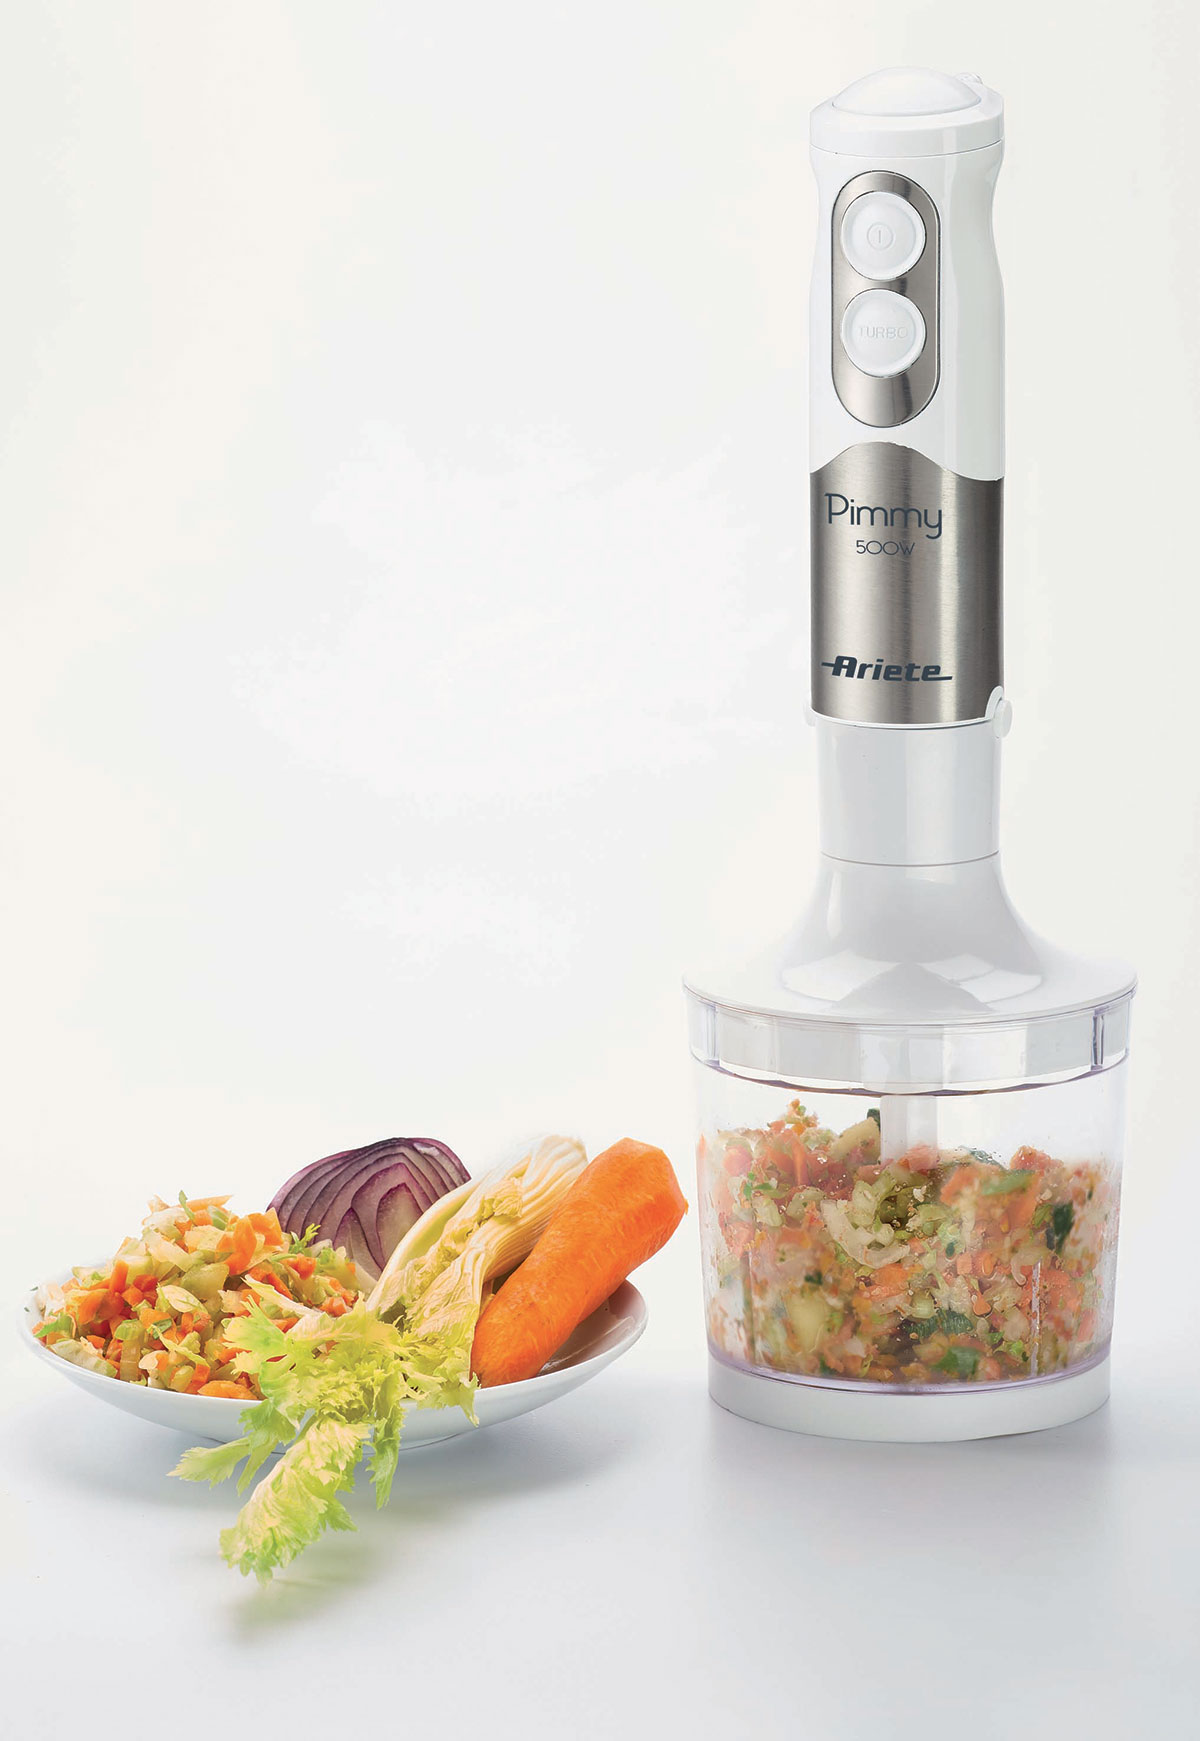 Bedoel amateur kromme Hand blender with electric whisk and chopper | Pimmy 500w 3 in 1 | Ariete